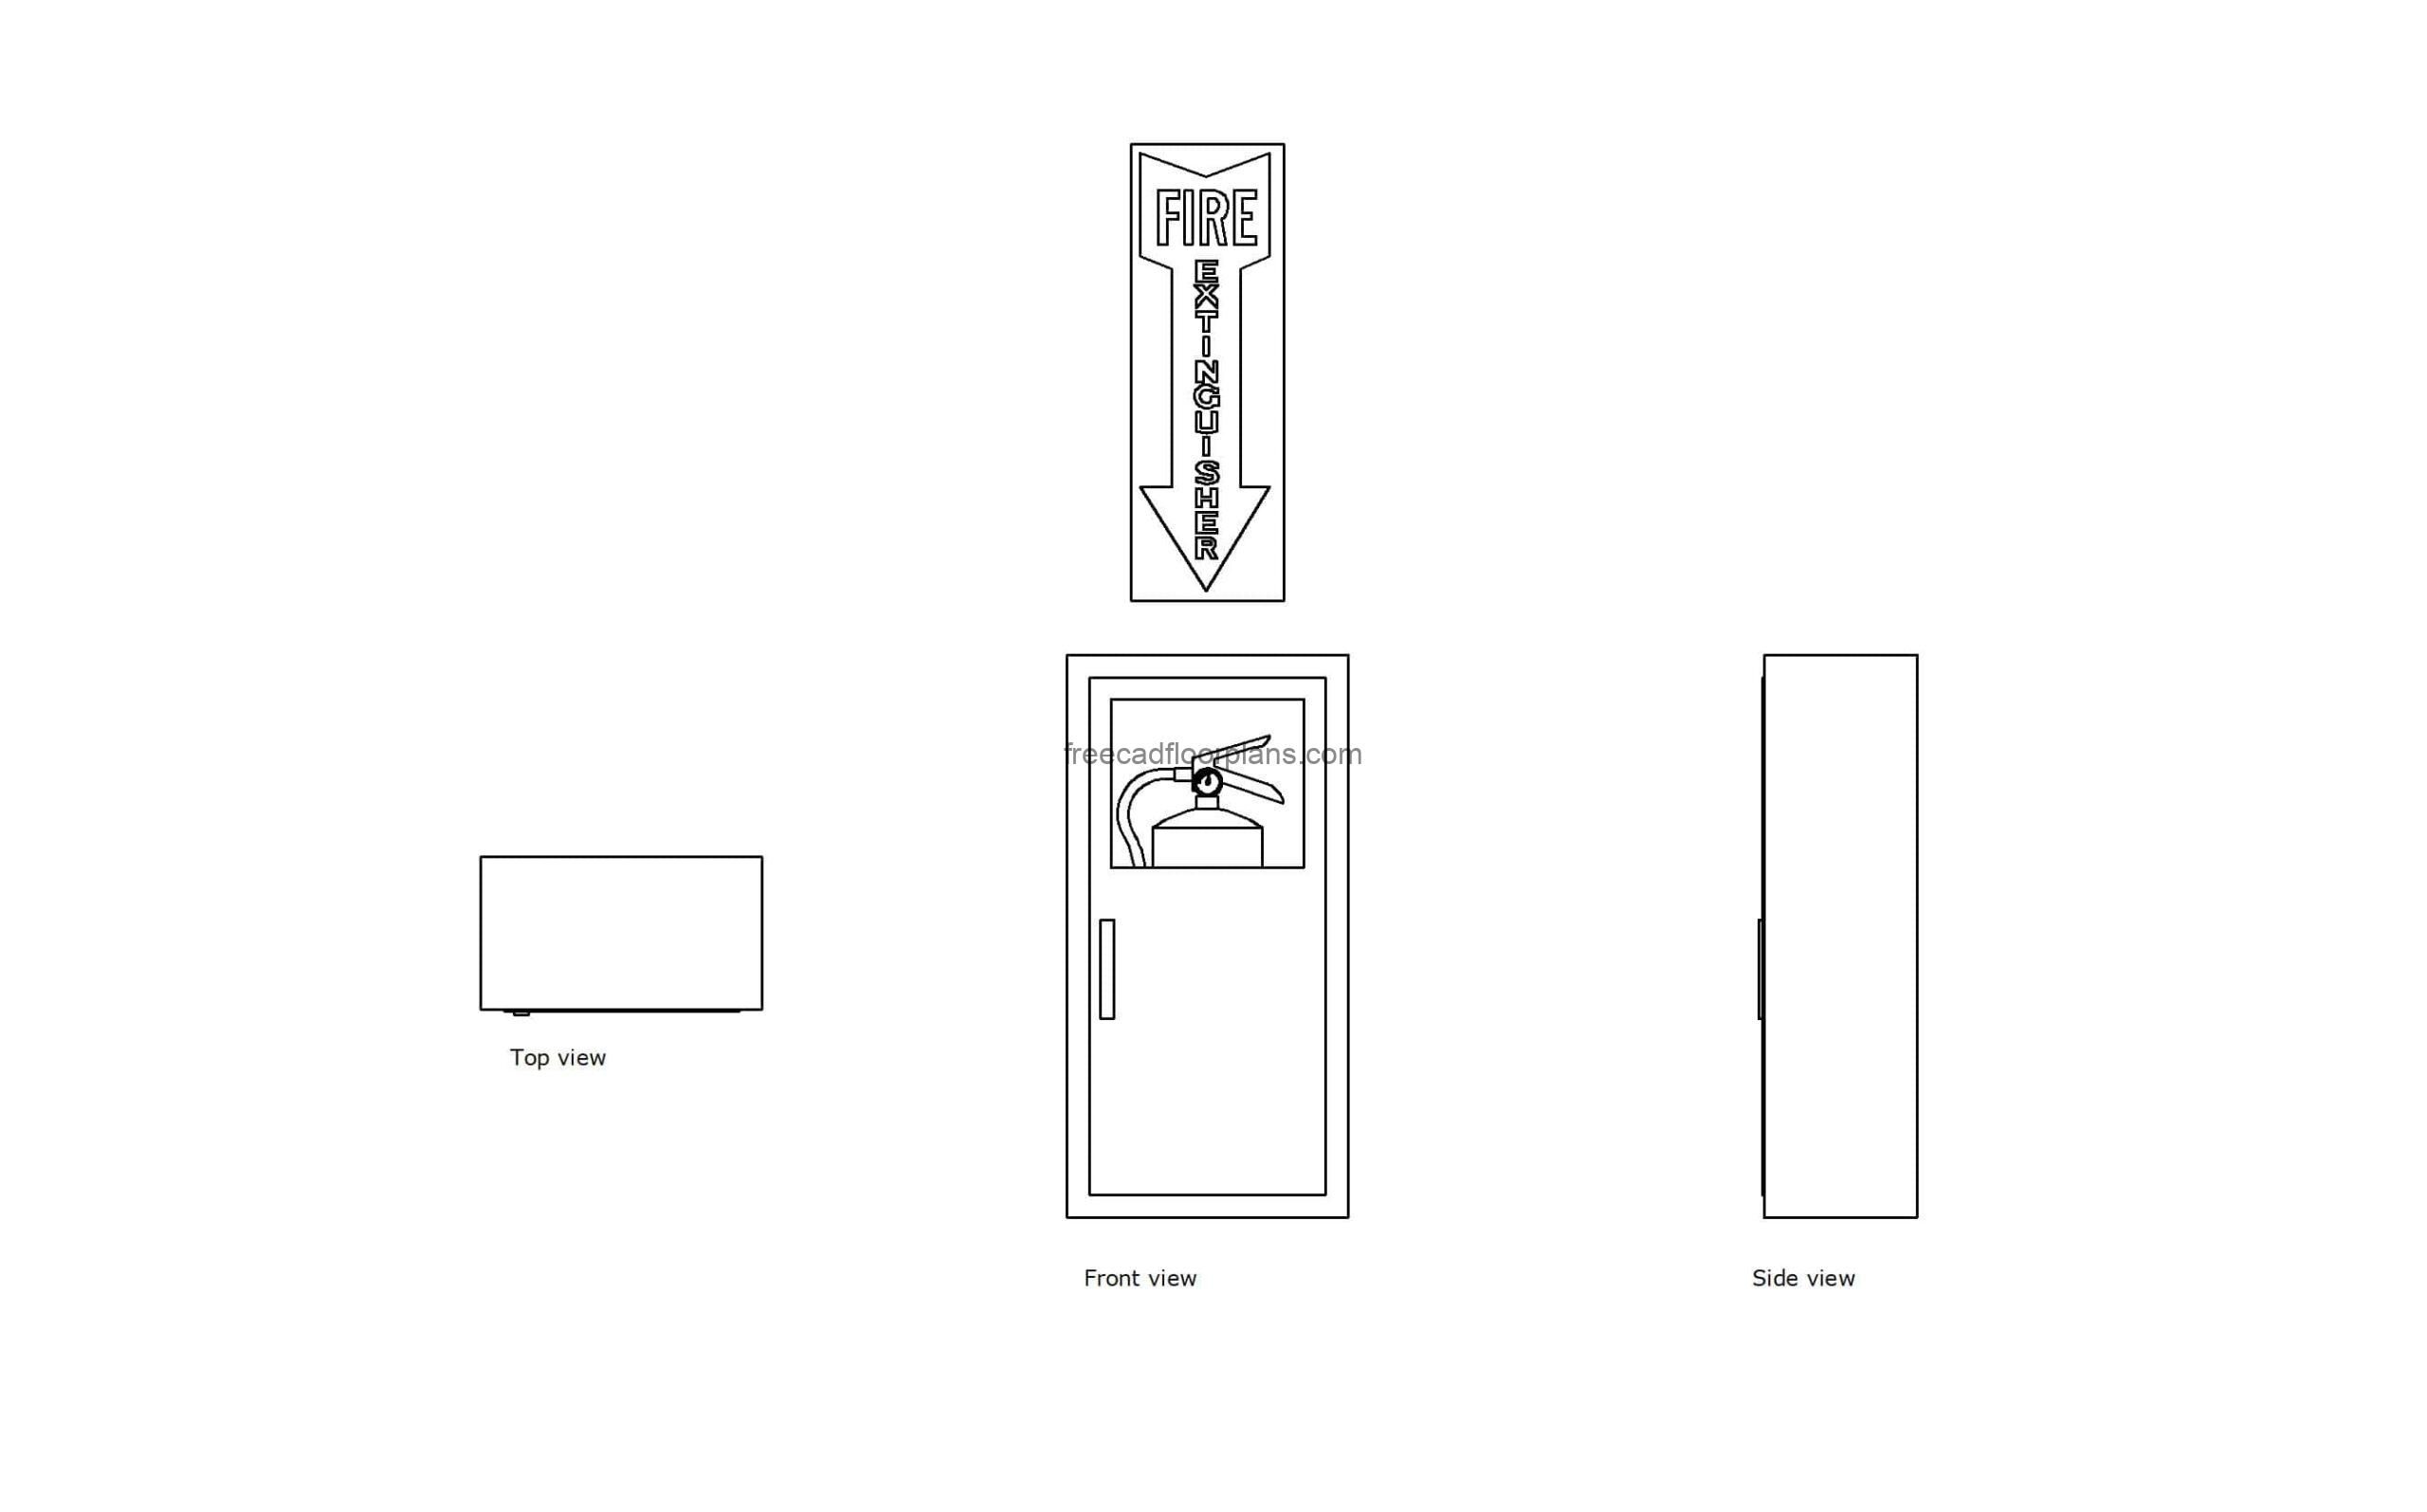 autocad drawing of a fire extinguisher cabinet 2d plan and elevation views, dwg file free for download